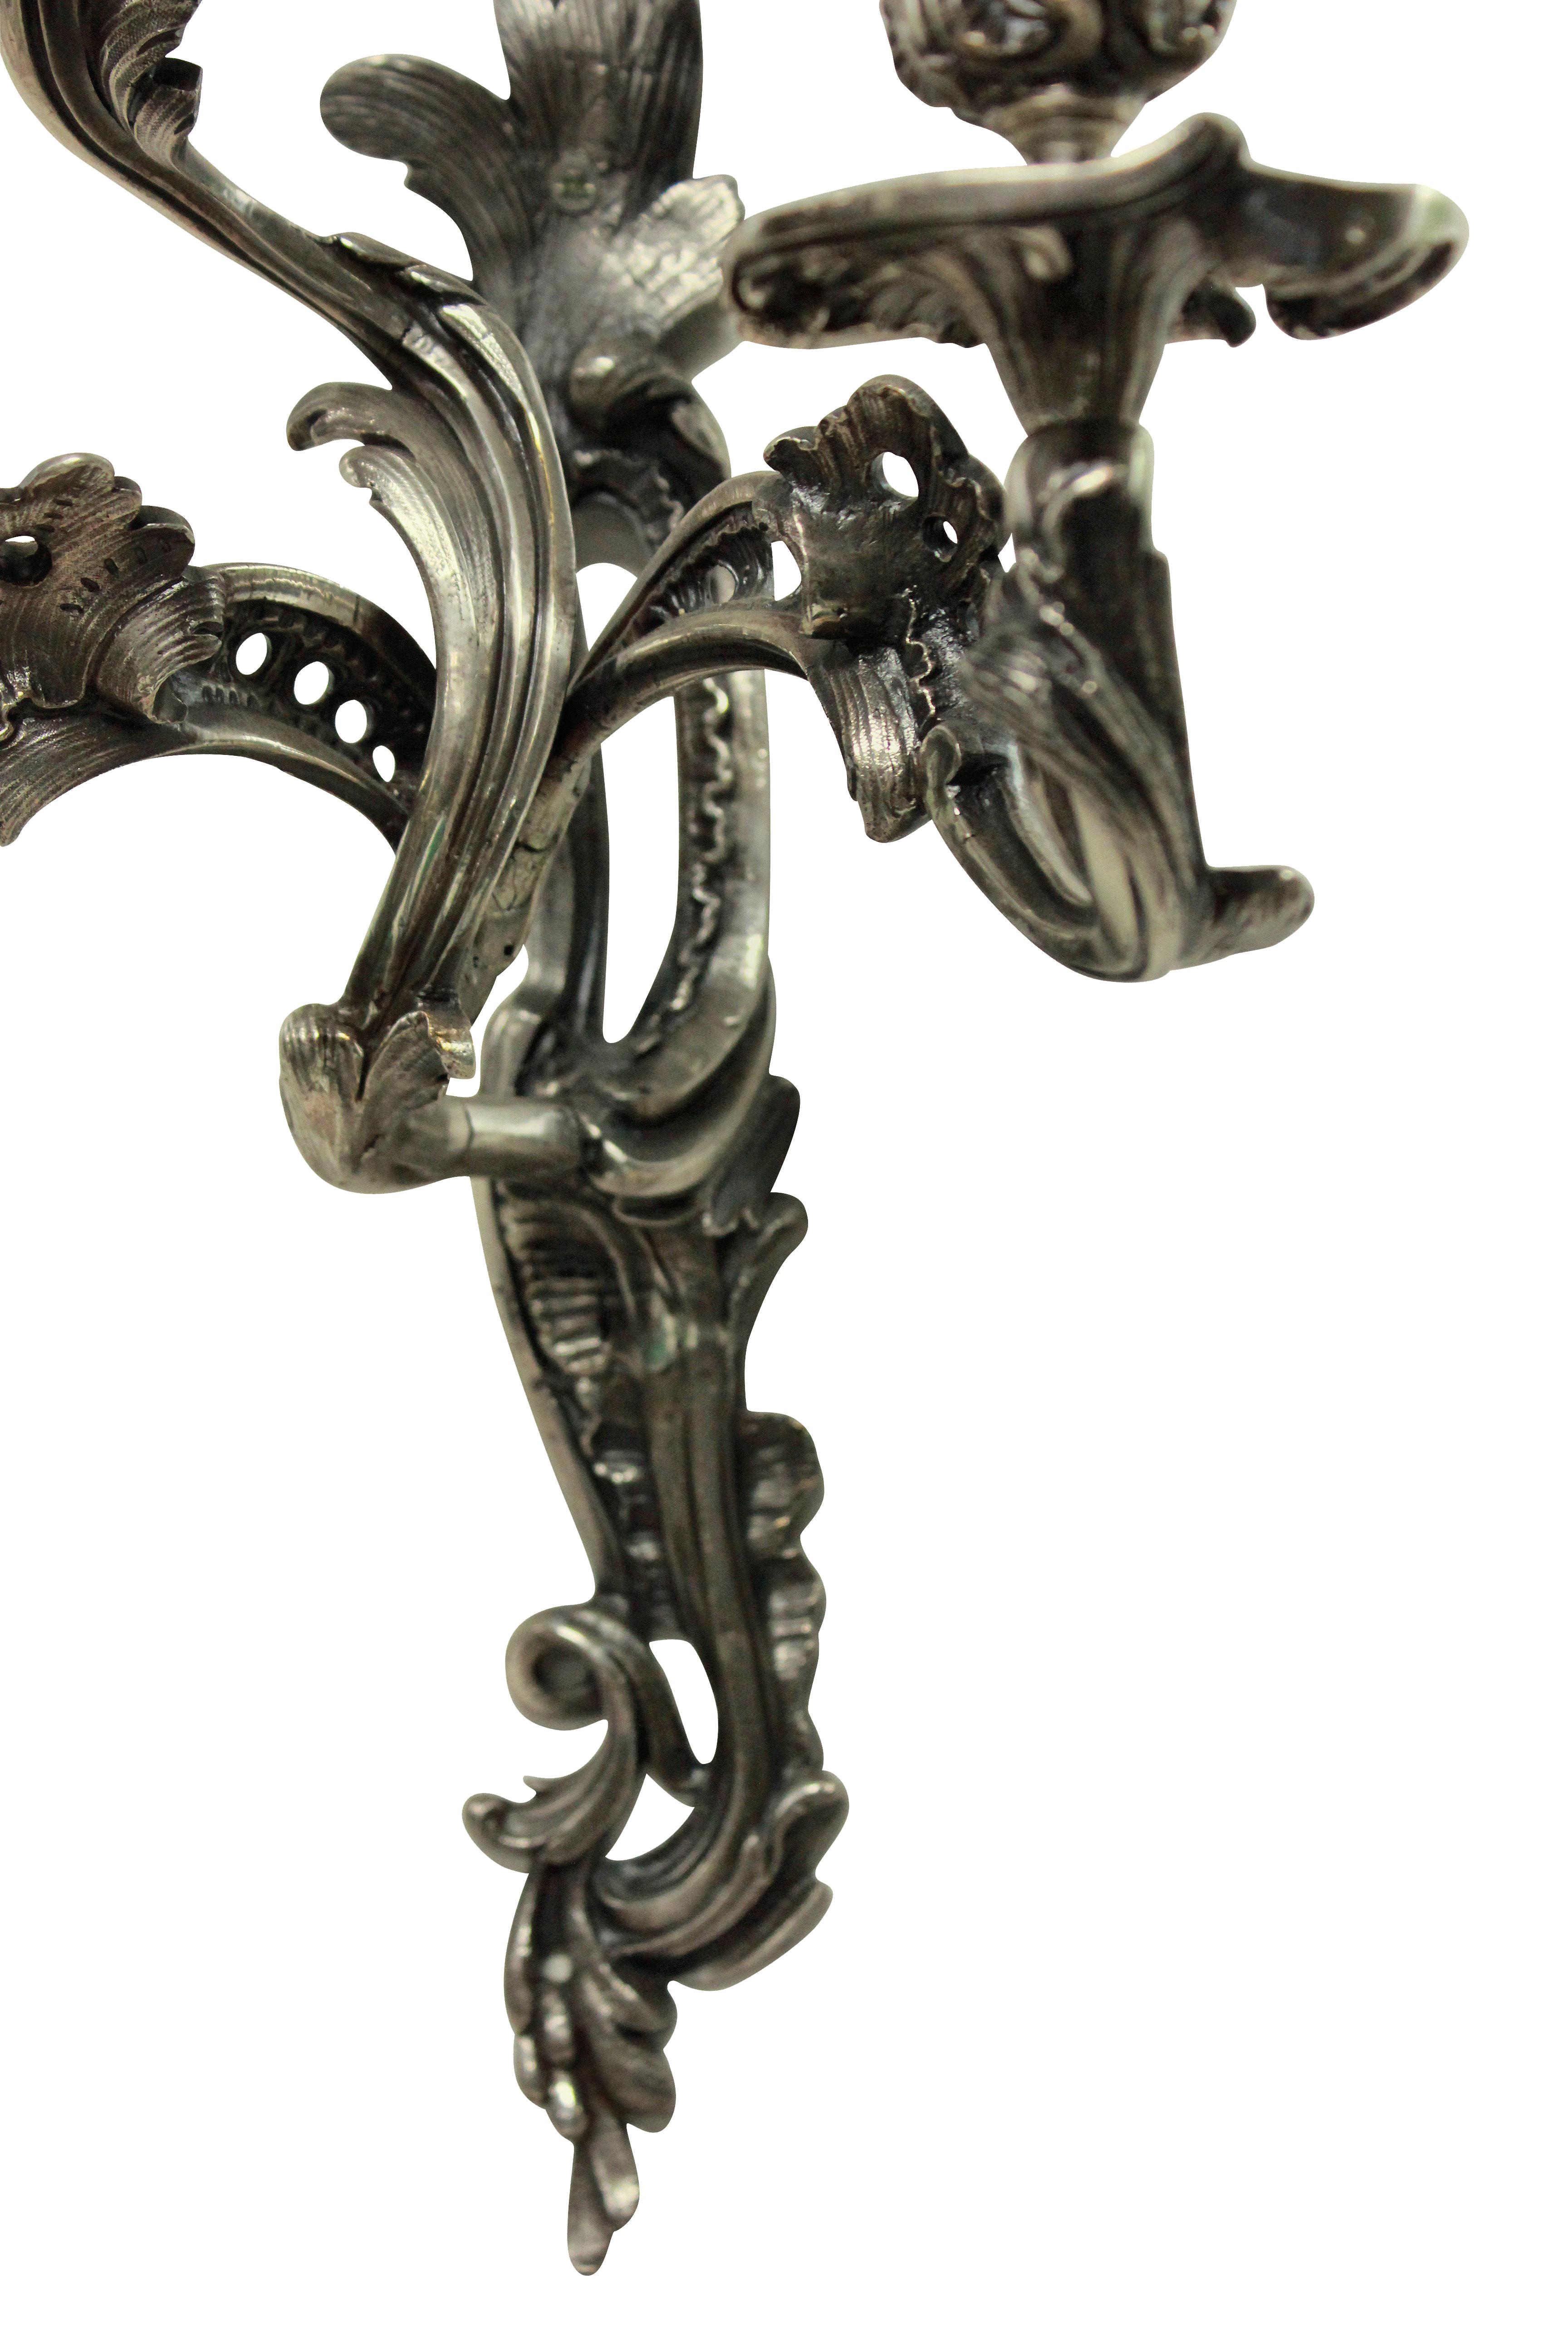 A pair of late 19th century Italian silver plated bronze Rococo three-arm wall sconces.

